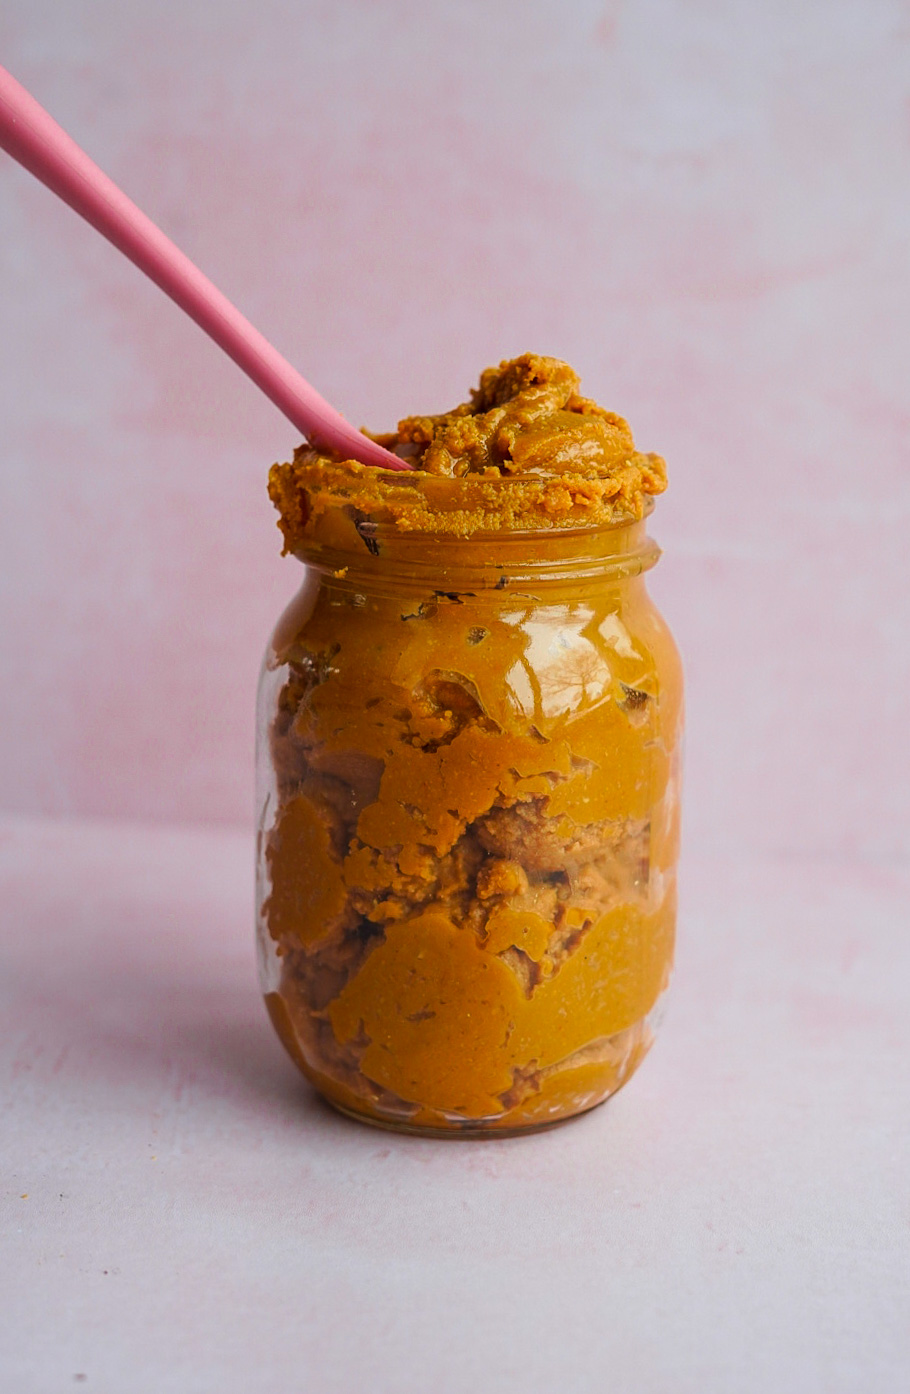 How To Make Peanut Butter - PlantYou - Recipe Instructions